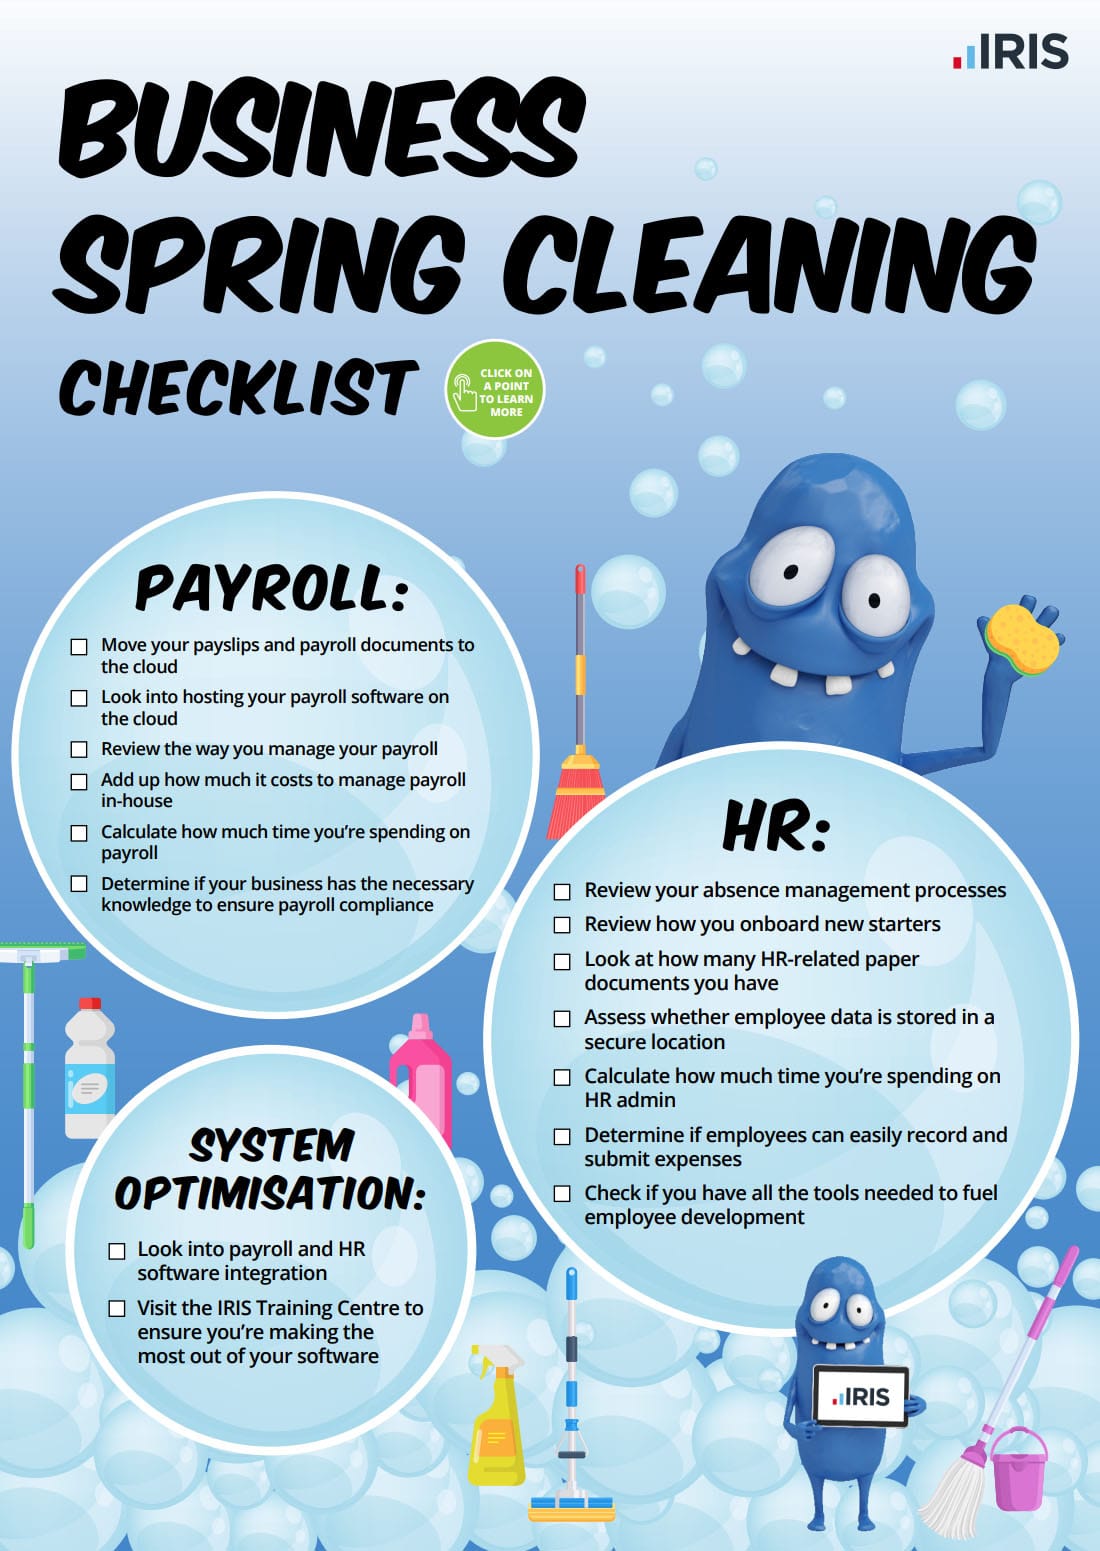 Spring cleaning | Business Spring Cleaning Checklist